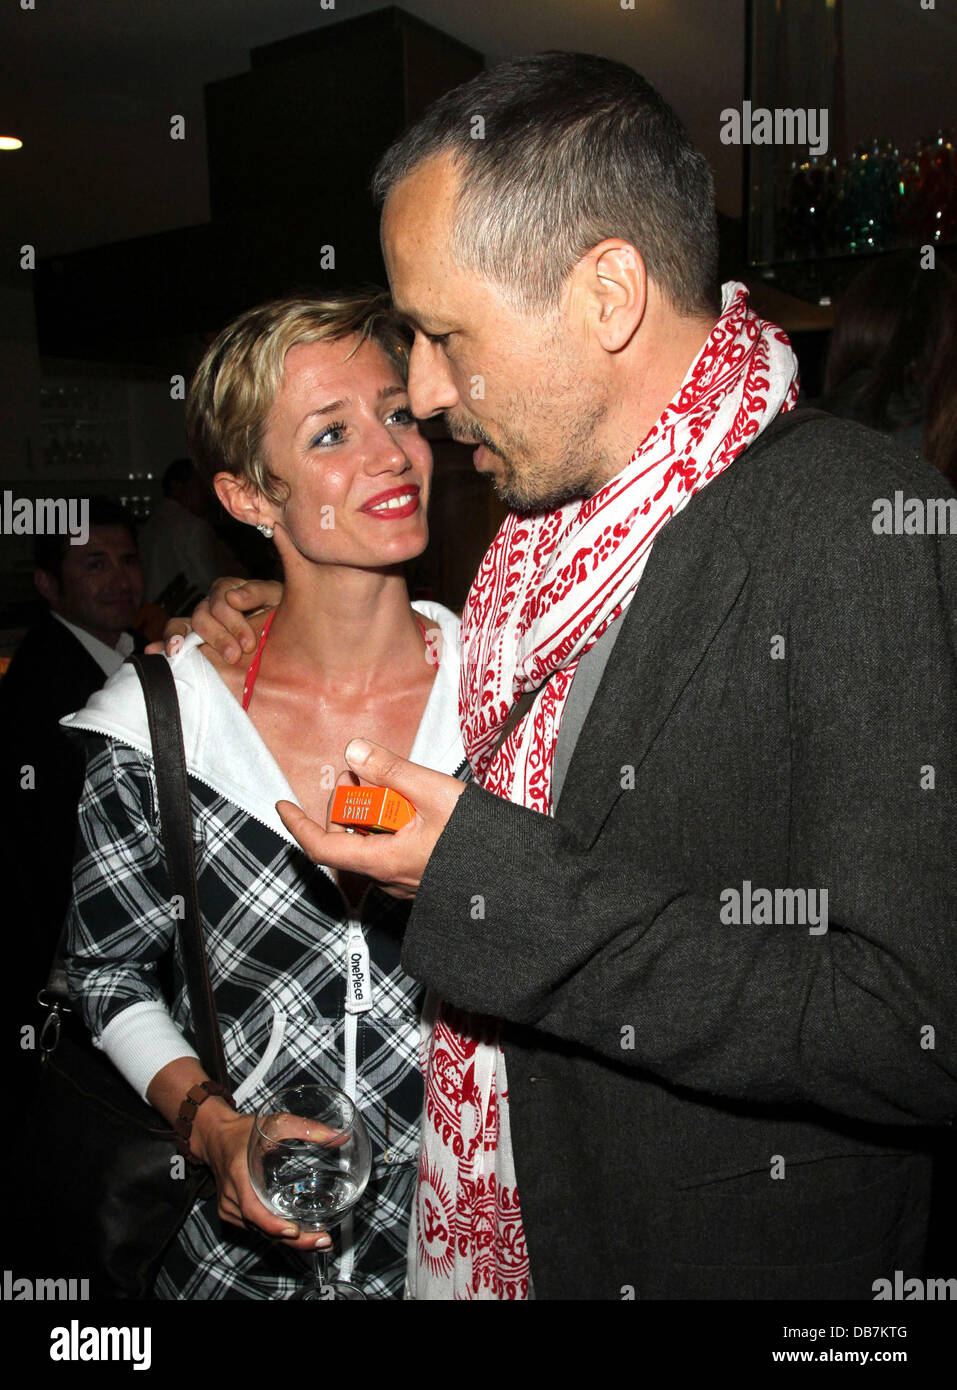 Lisa Dwan and Michael Wincott The grand opening of the new OnePiece store in West Hollywood Los Angeles, California - 12.05.11 Stock Photo